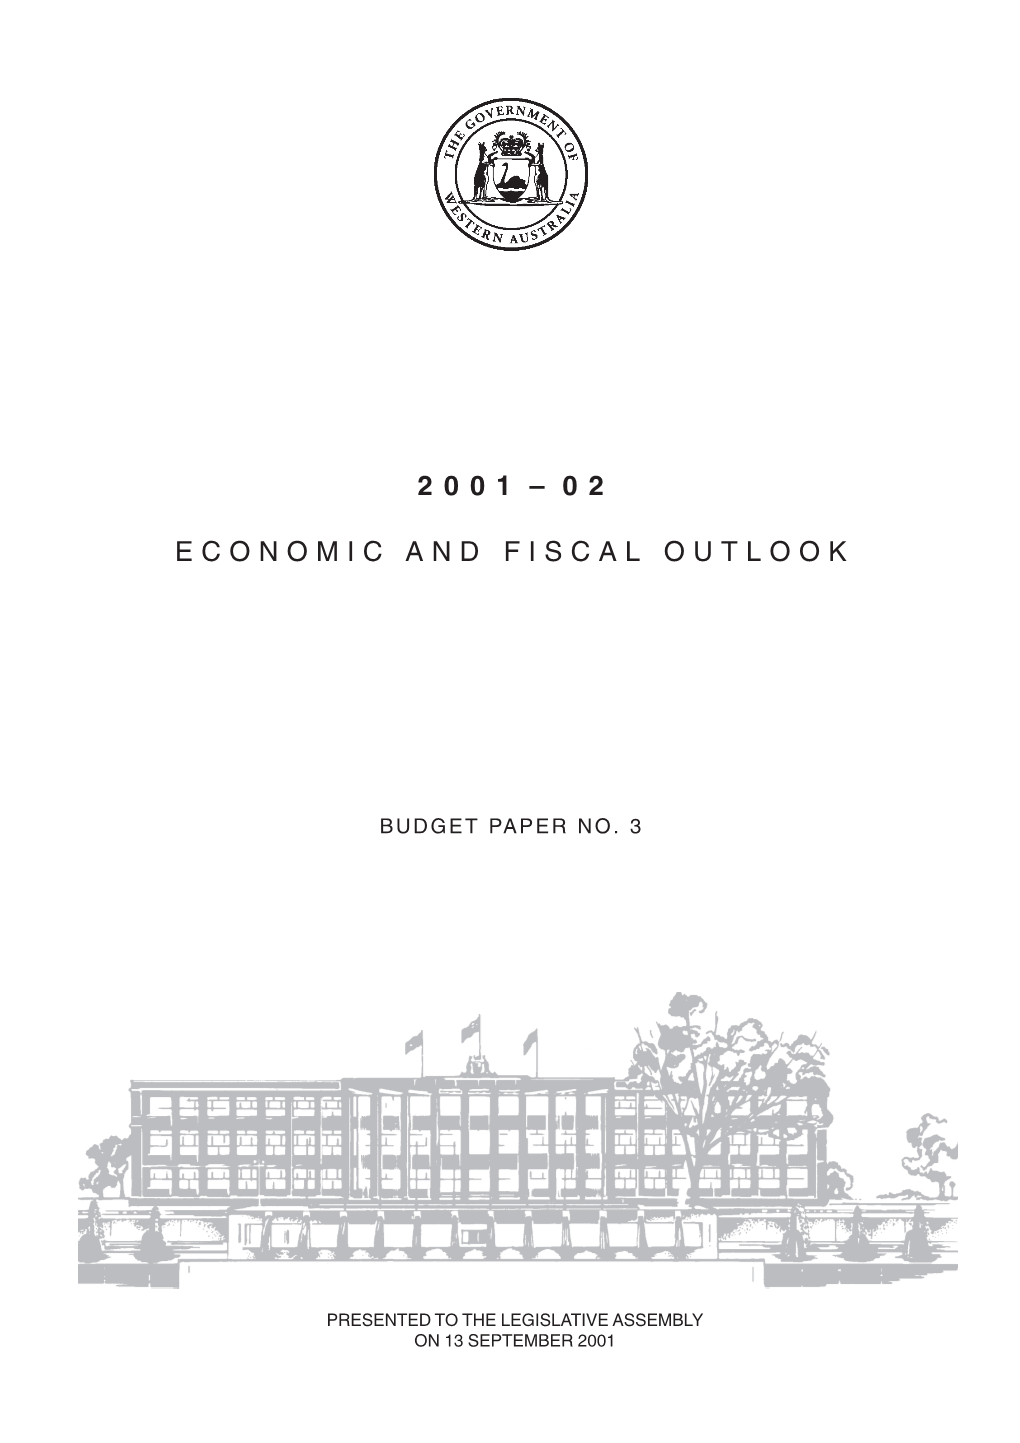 2001 – 02 Economic and Fiscal Outlook